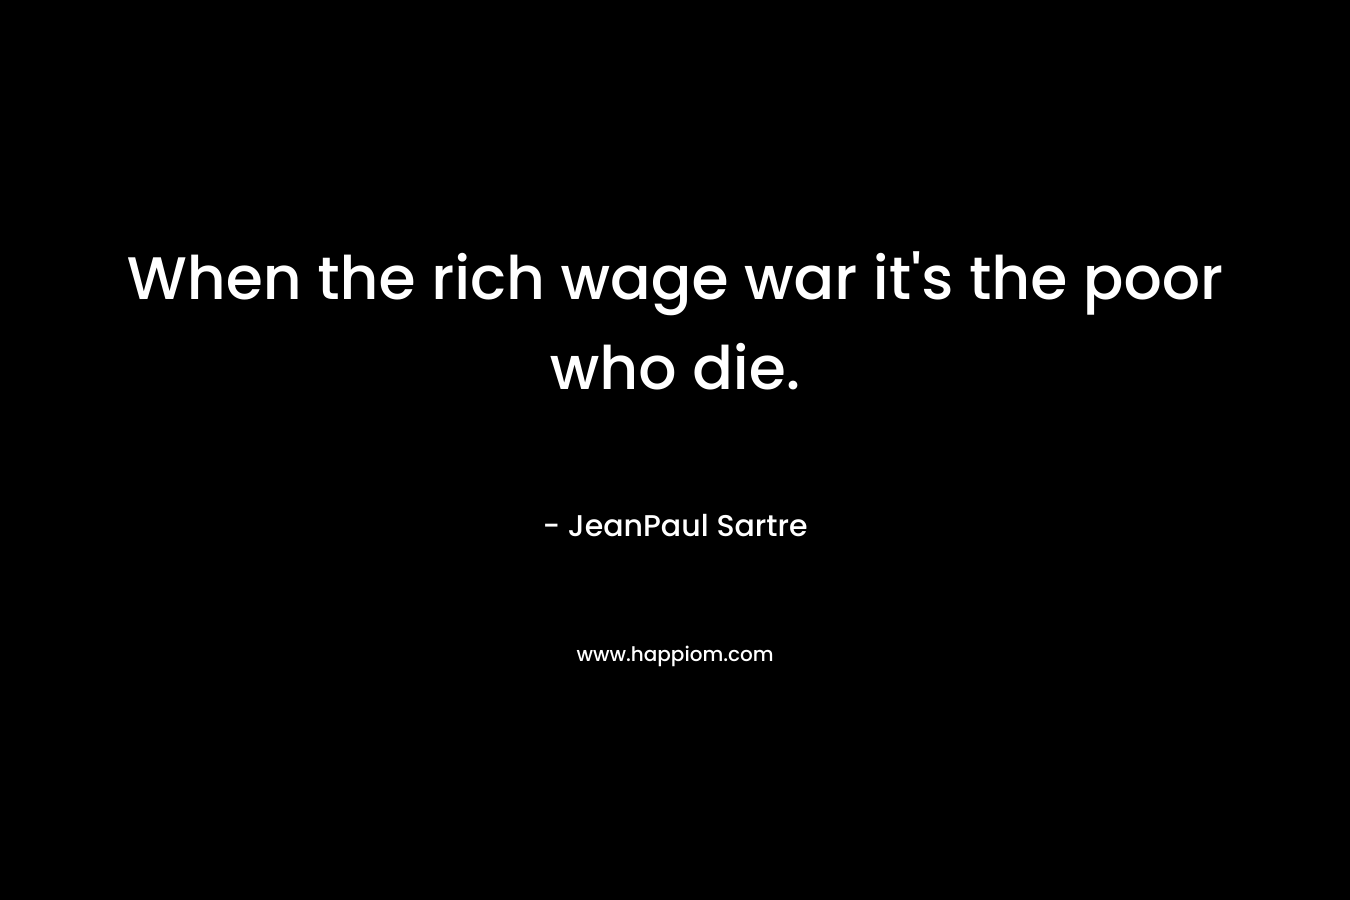 When the rich wage war it’s the poor who die. – JeanPaul Sartre